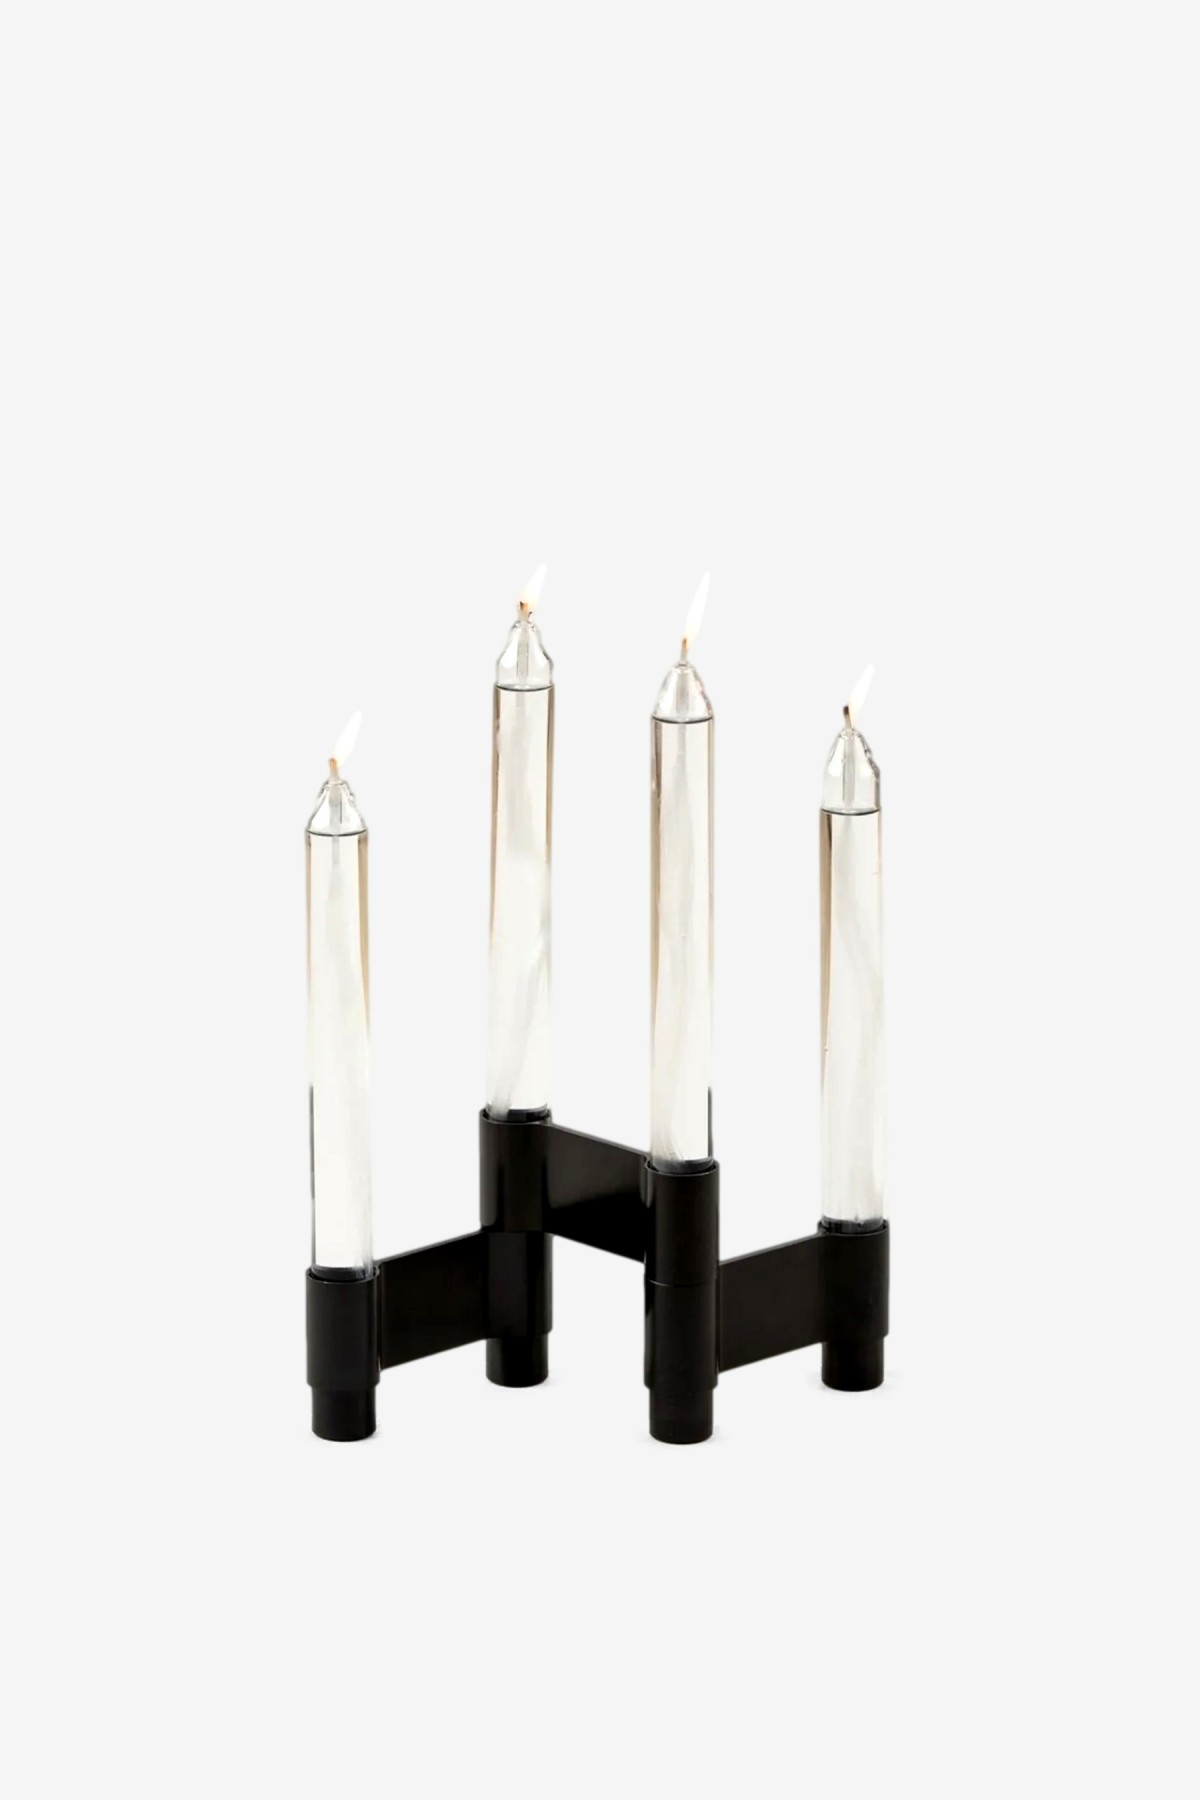 Studio About Link Candle Holder in Black